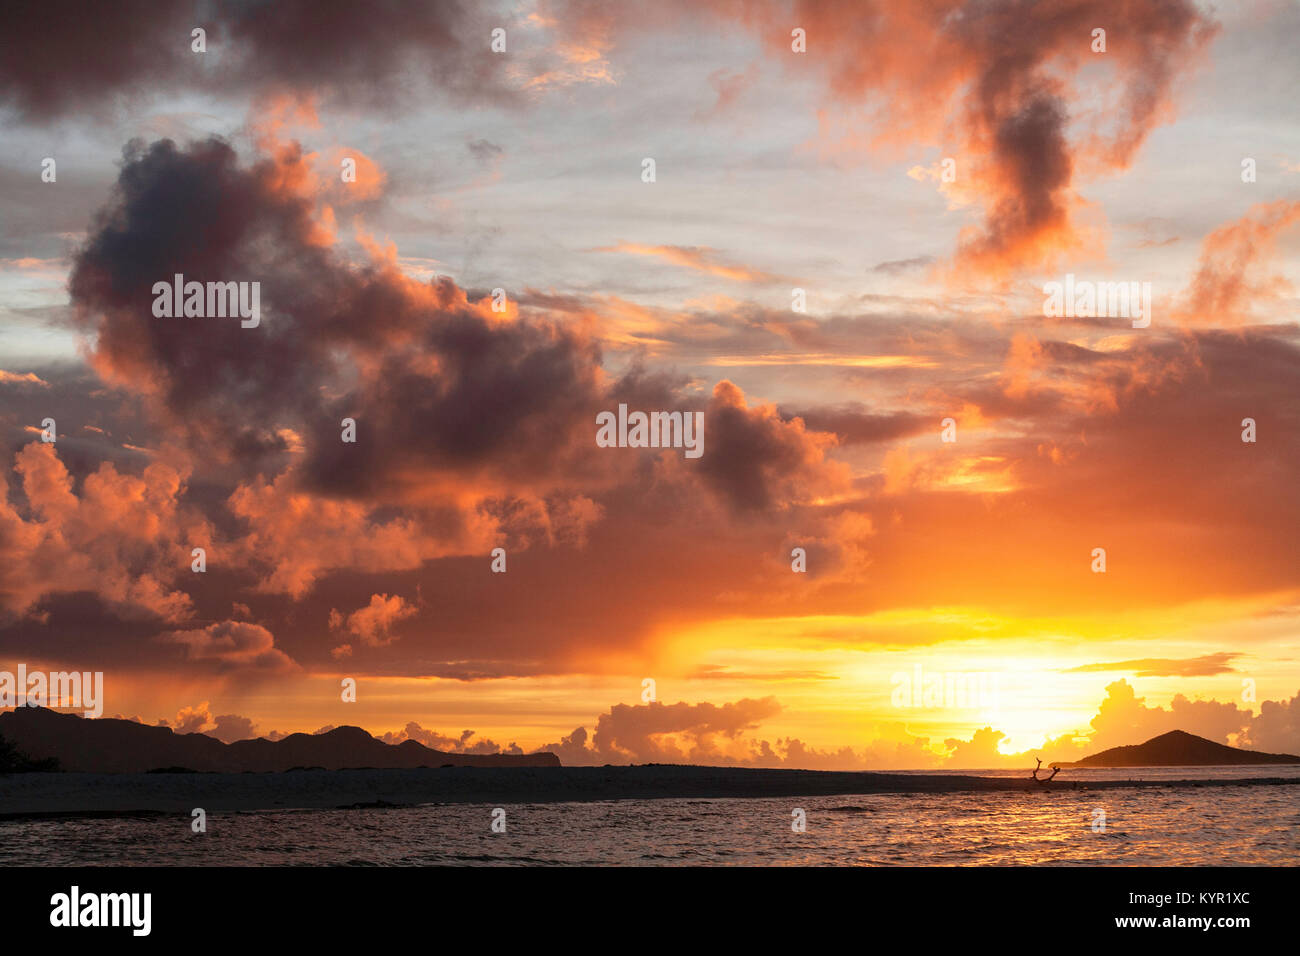 Sunset in the Tobago Cays, Grenadines Stock Photo